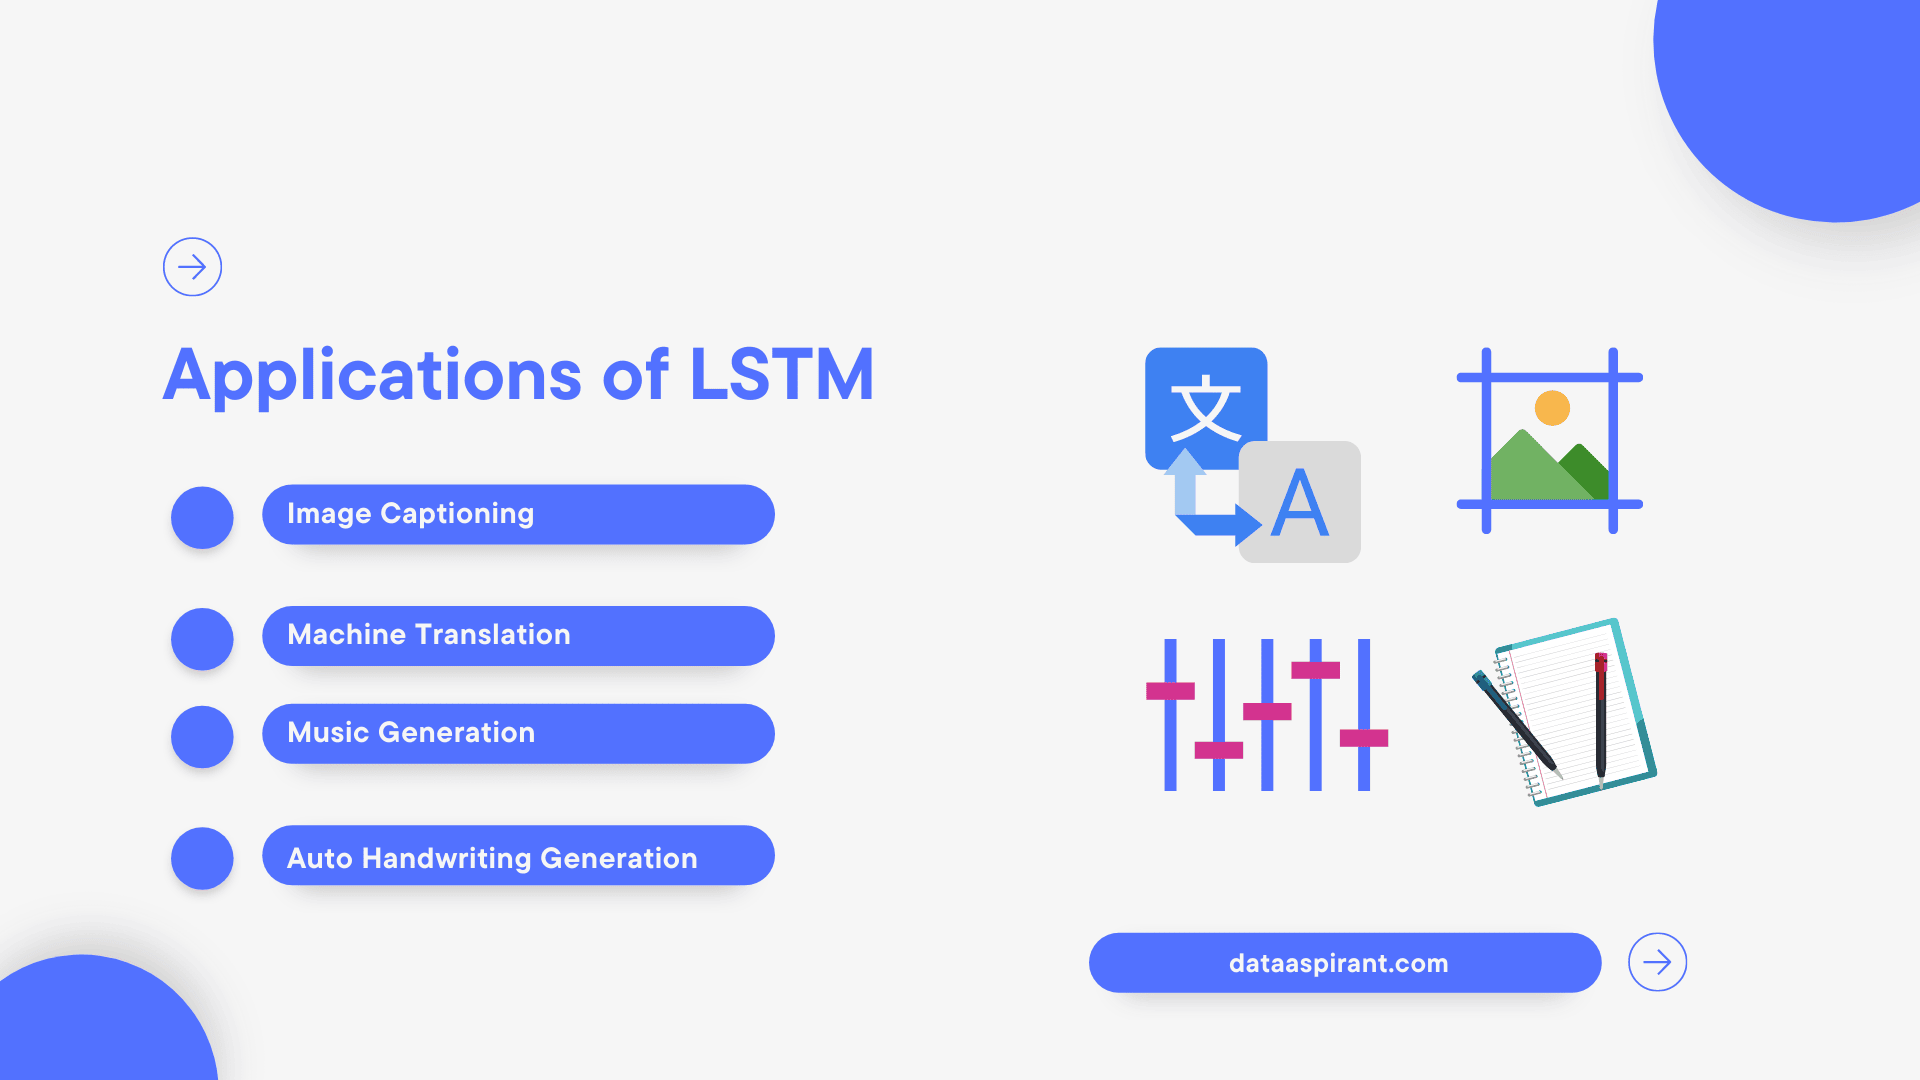 Applications of LSTM